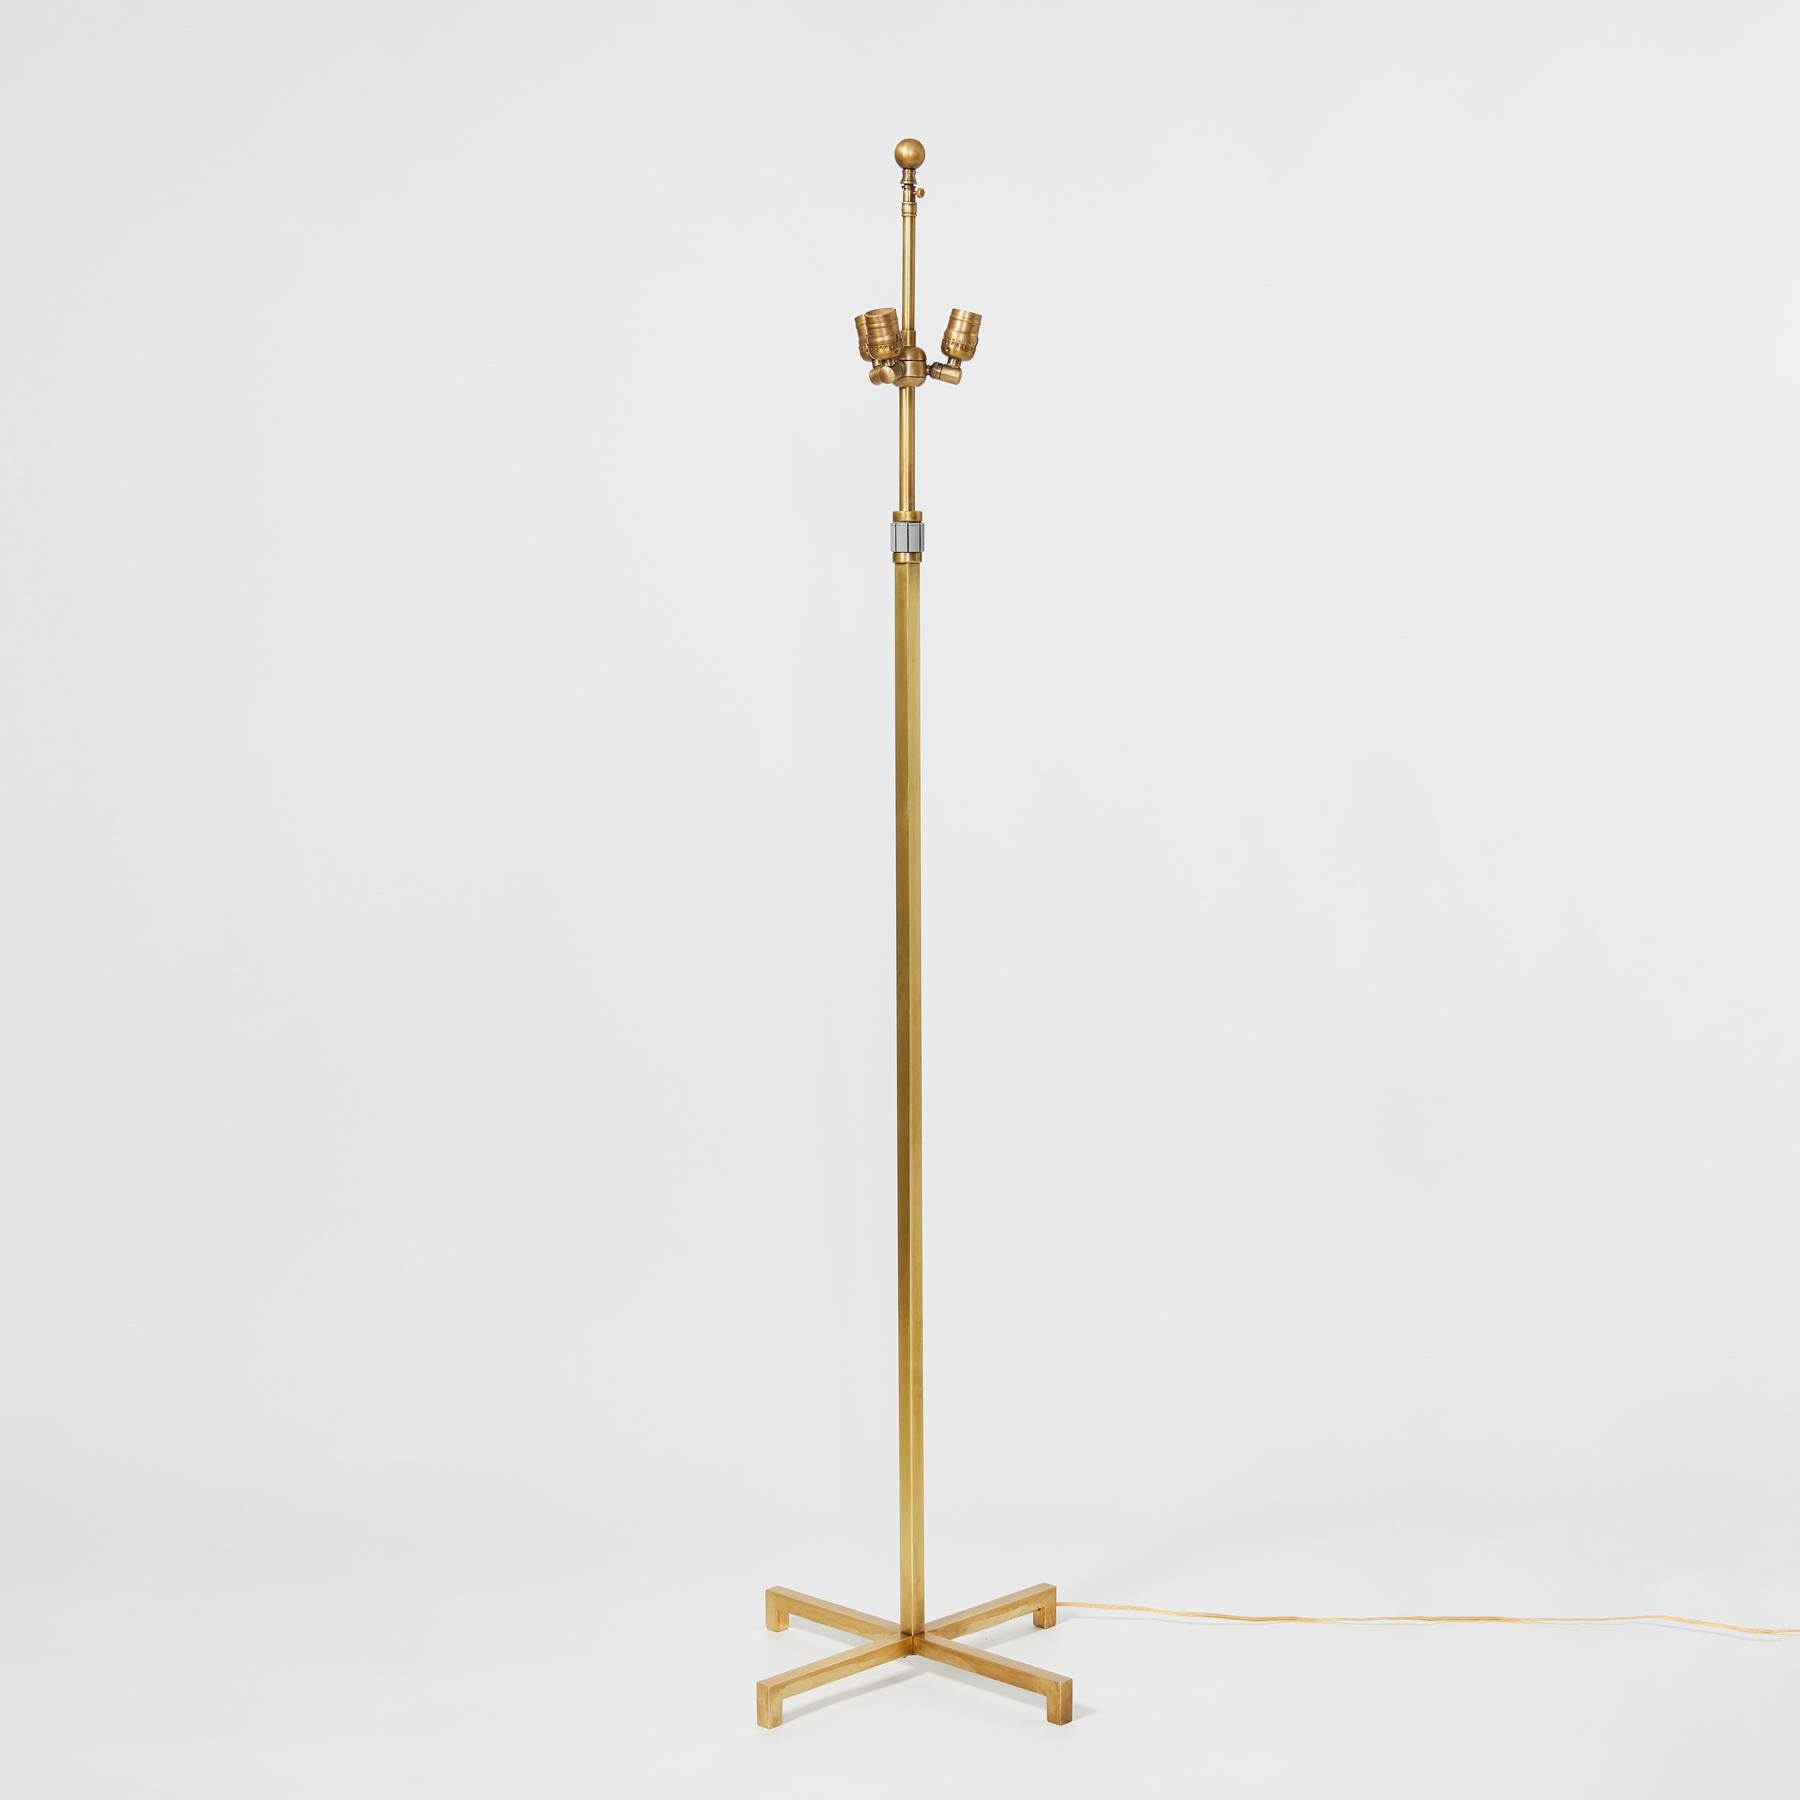 A Mid-Century Modern brass standing lamp with brass square rod construction, three medium base sockets, and unique barrel switch below lamp cluster.

Measures: 17'' W x 17'' D x 62''- 66'' H(Adjustable).